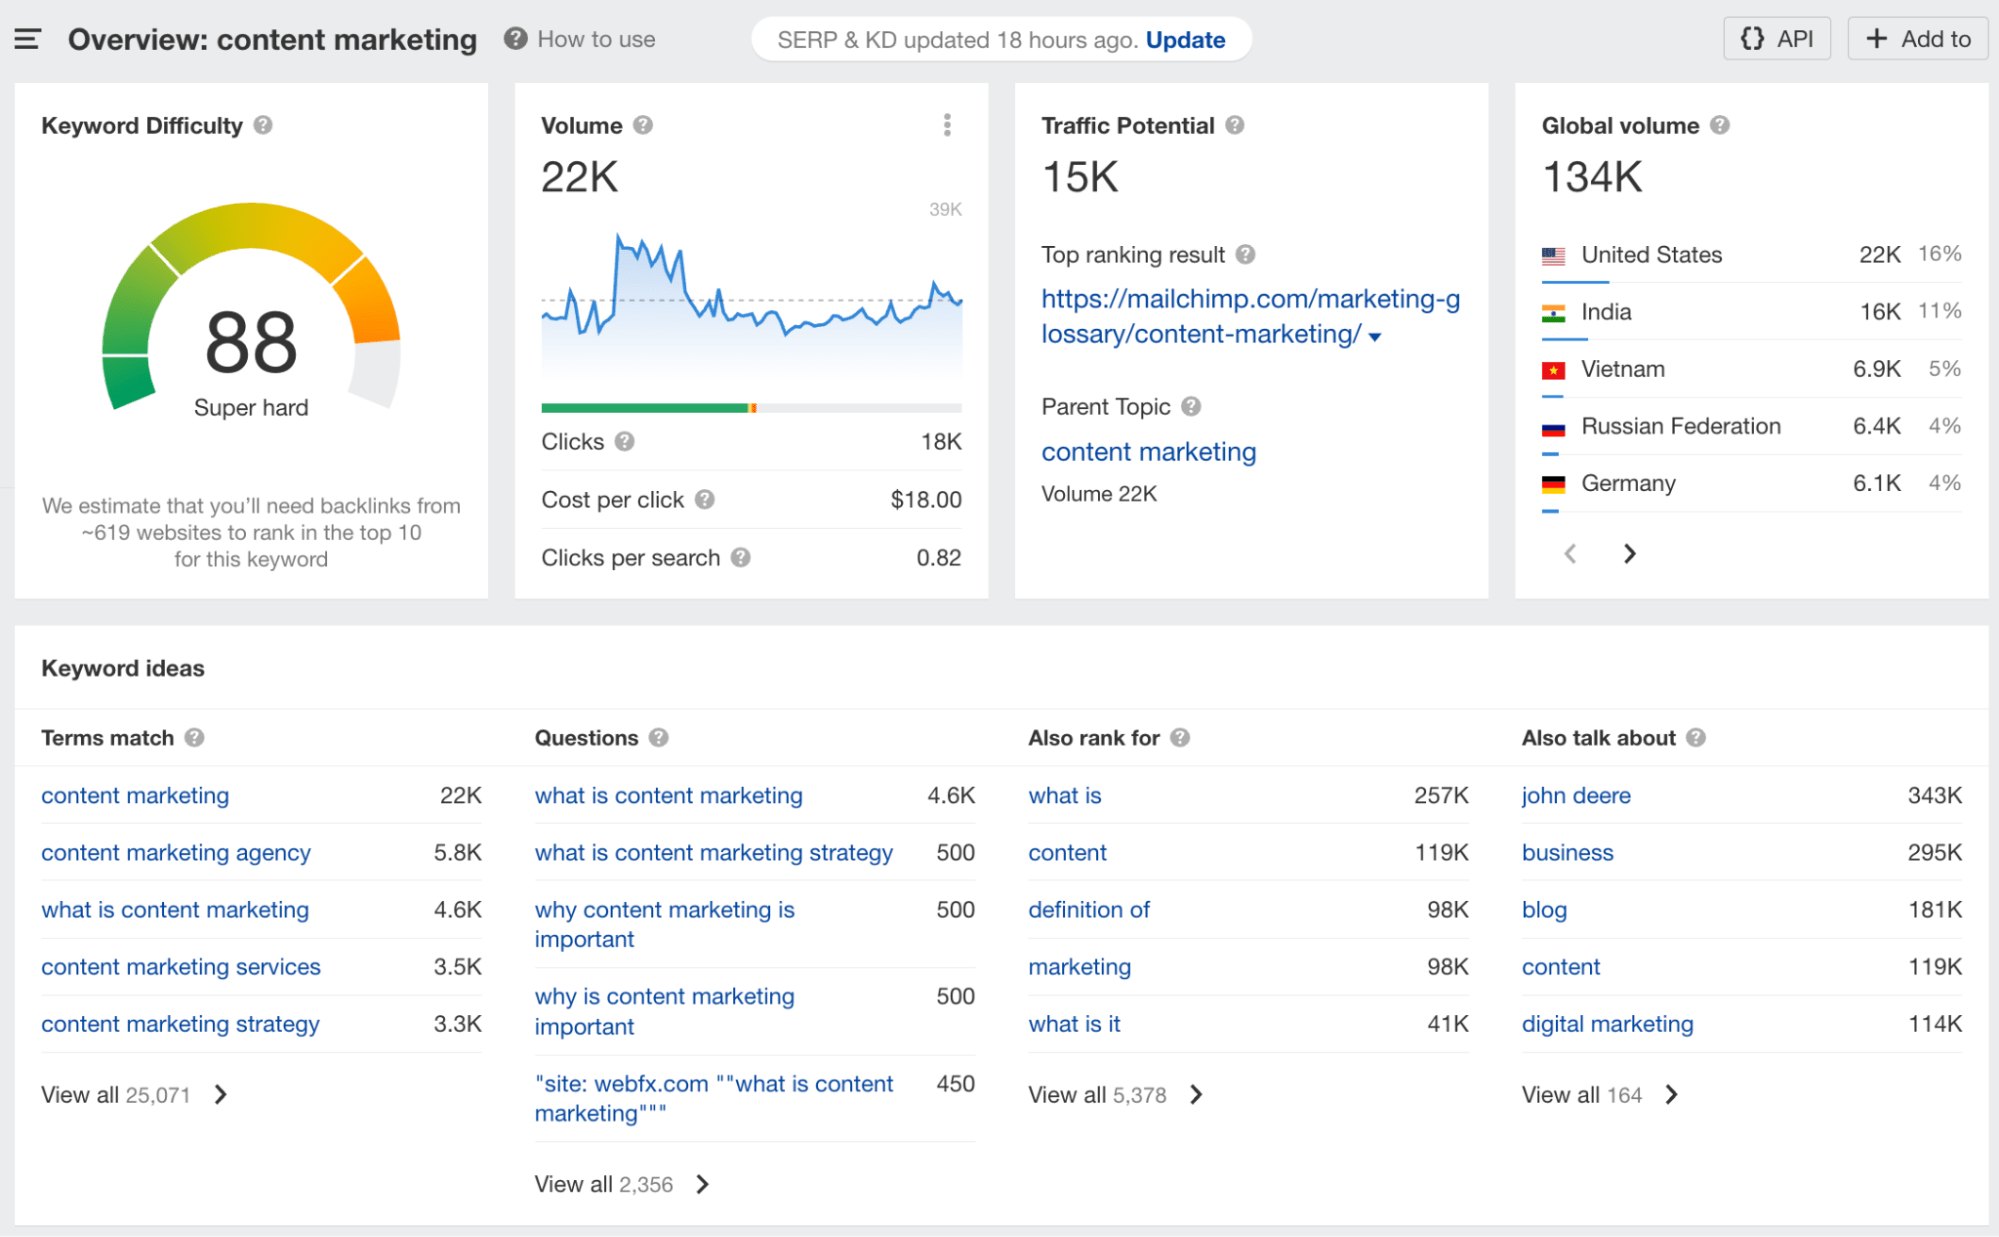 Ahrefs keyword overview for "content marketing"